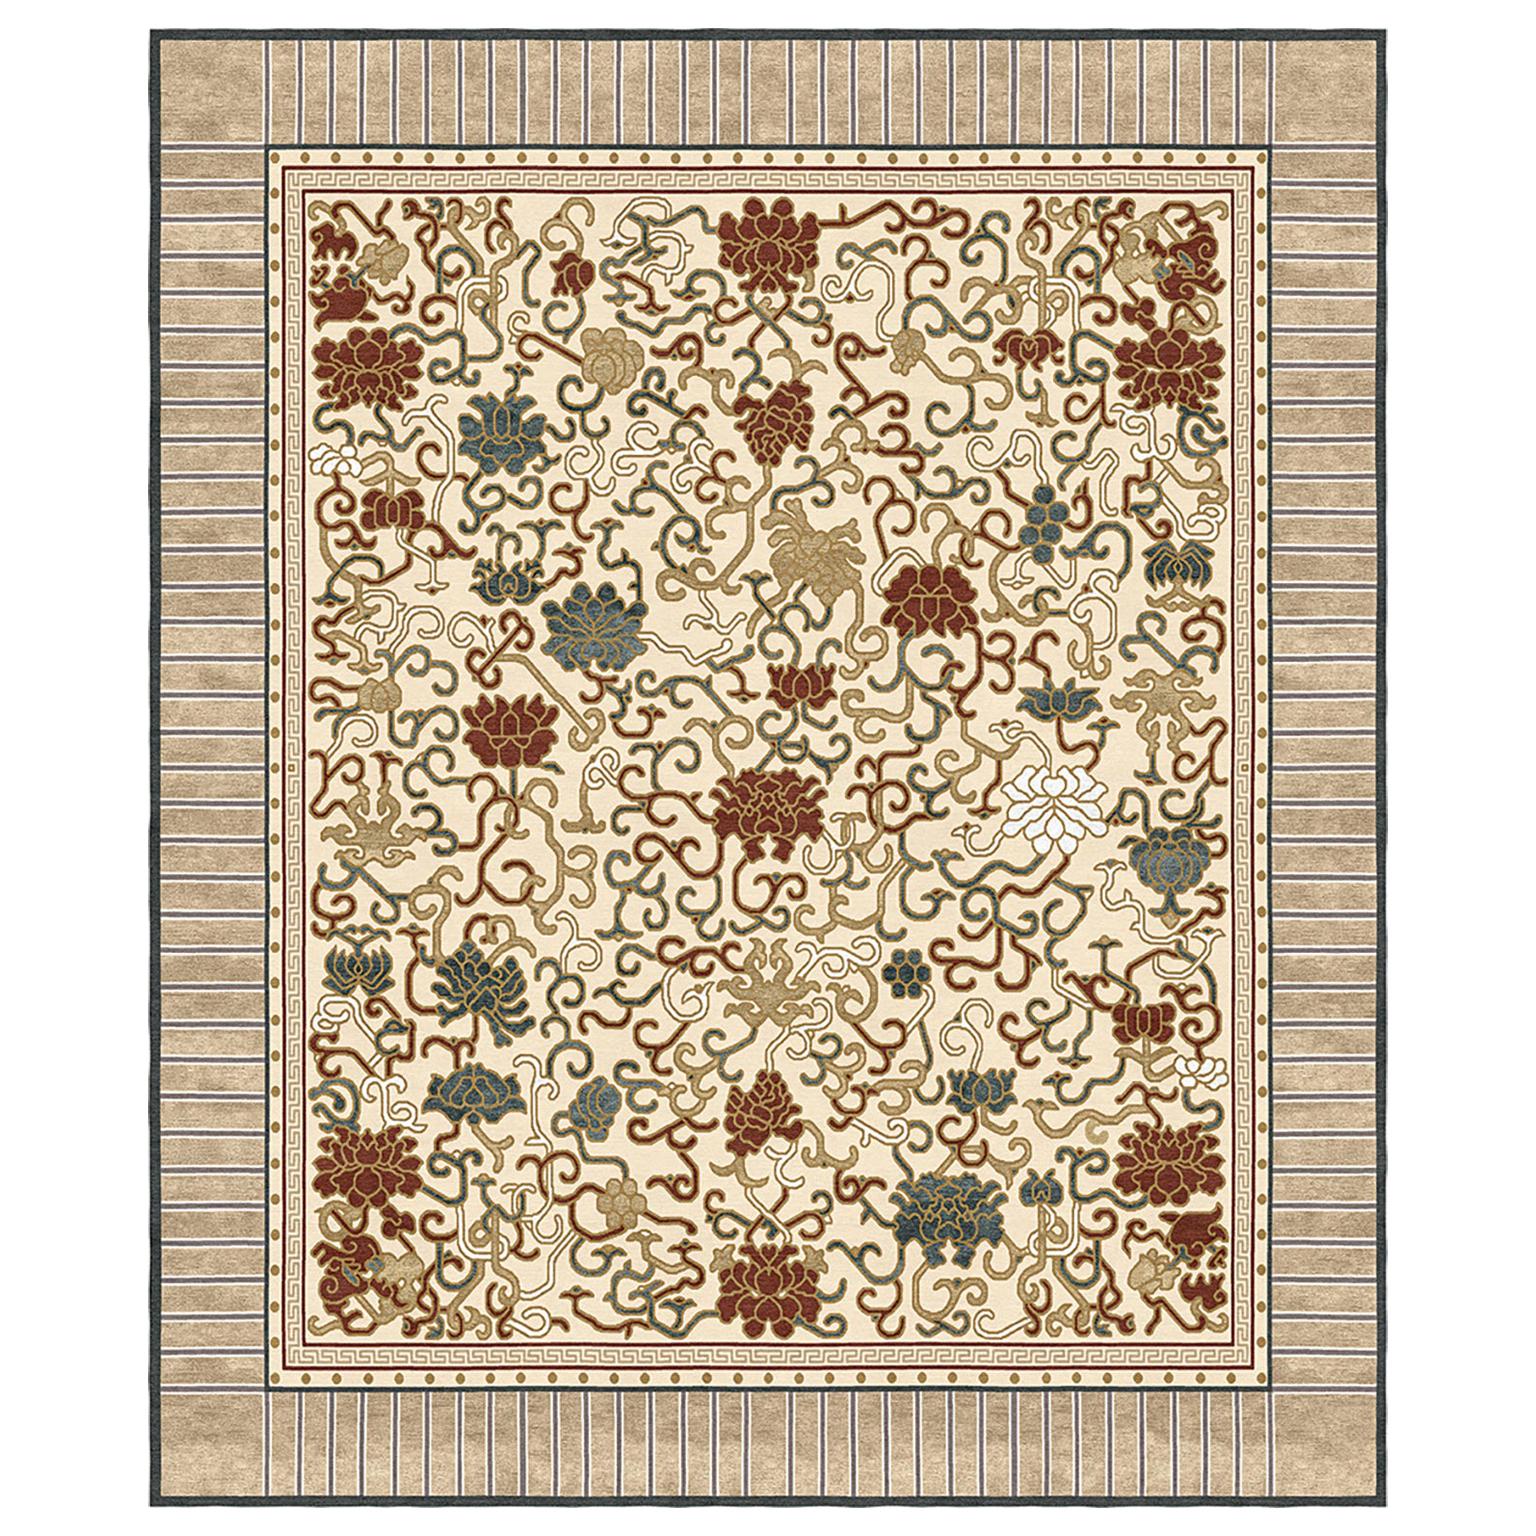 Floral Chinoiserie Rug natural Wool Silk - Lingering Garden Beige For Sale